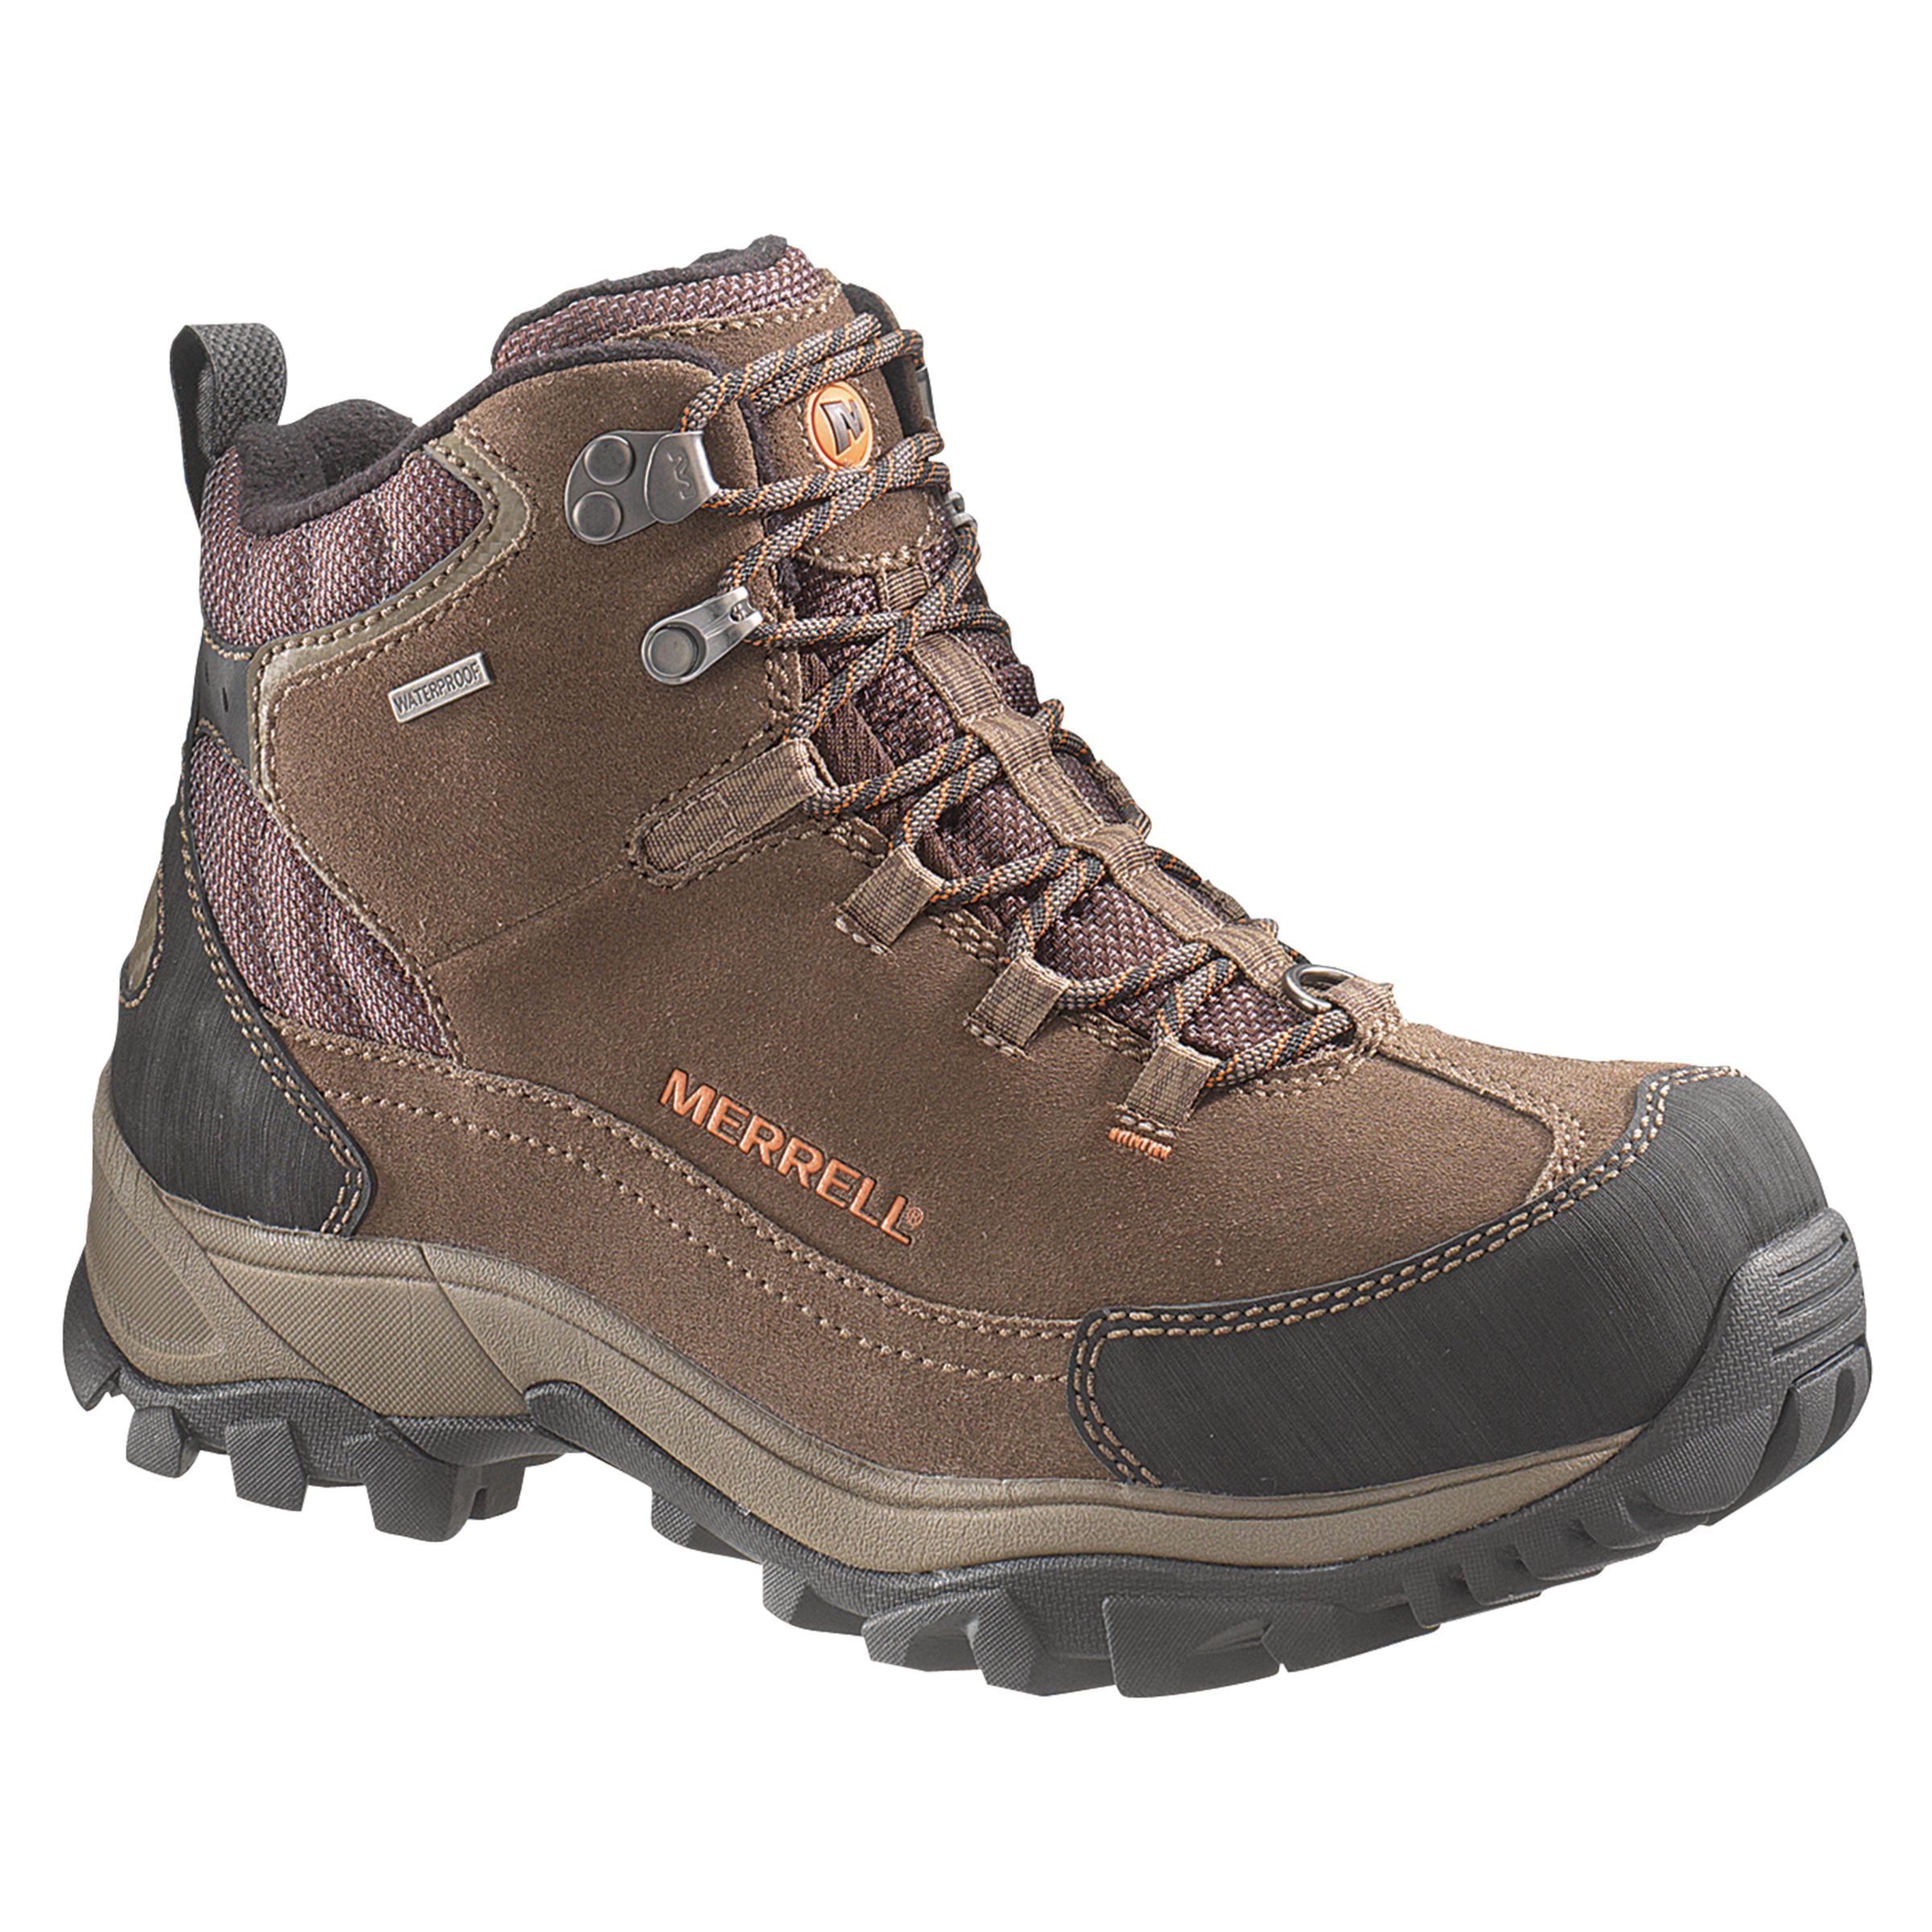 Merrell Norsehund Omega Men's Hiking Boots, Brown